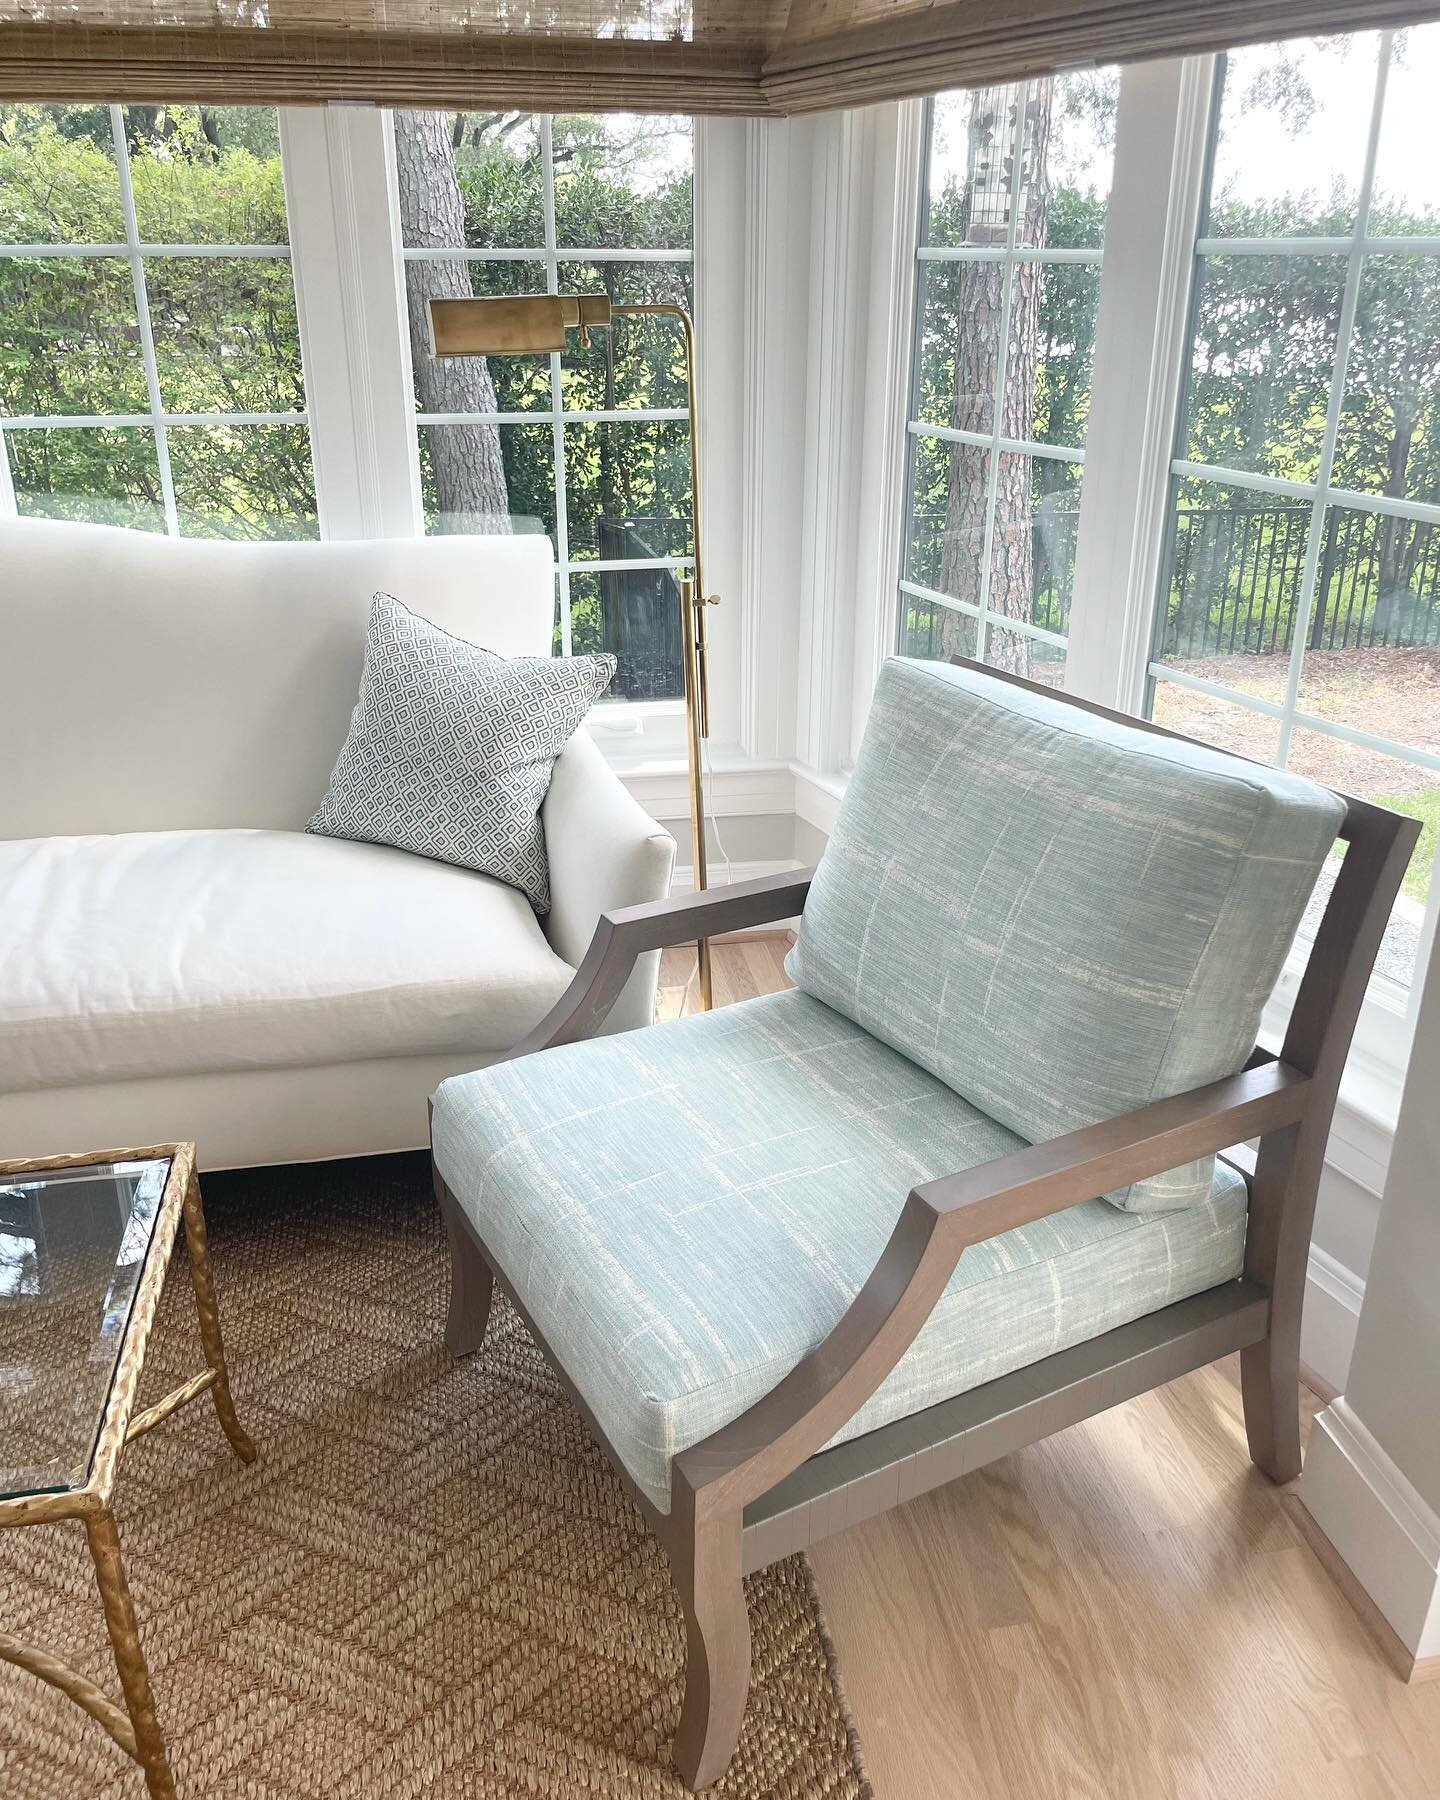 Detail of a small sitting area we have recently completed with @michelleadamsinteriors 💙. #keepingroom #sittingarea #interiors #design #decor #homedecor #interiordesign #decorating #designers #757 #remodel